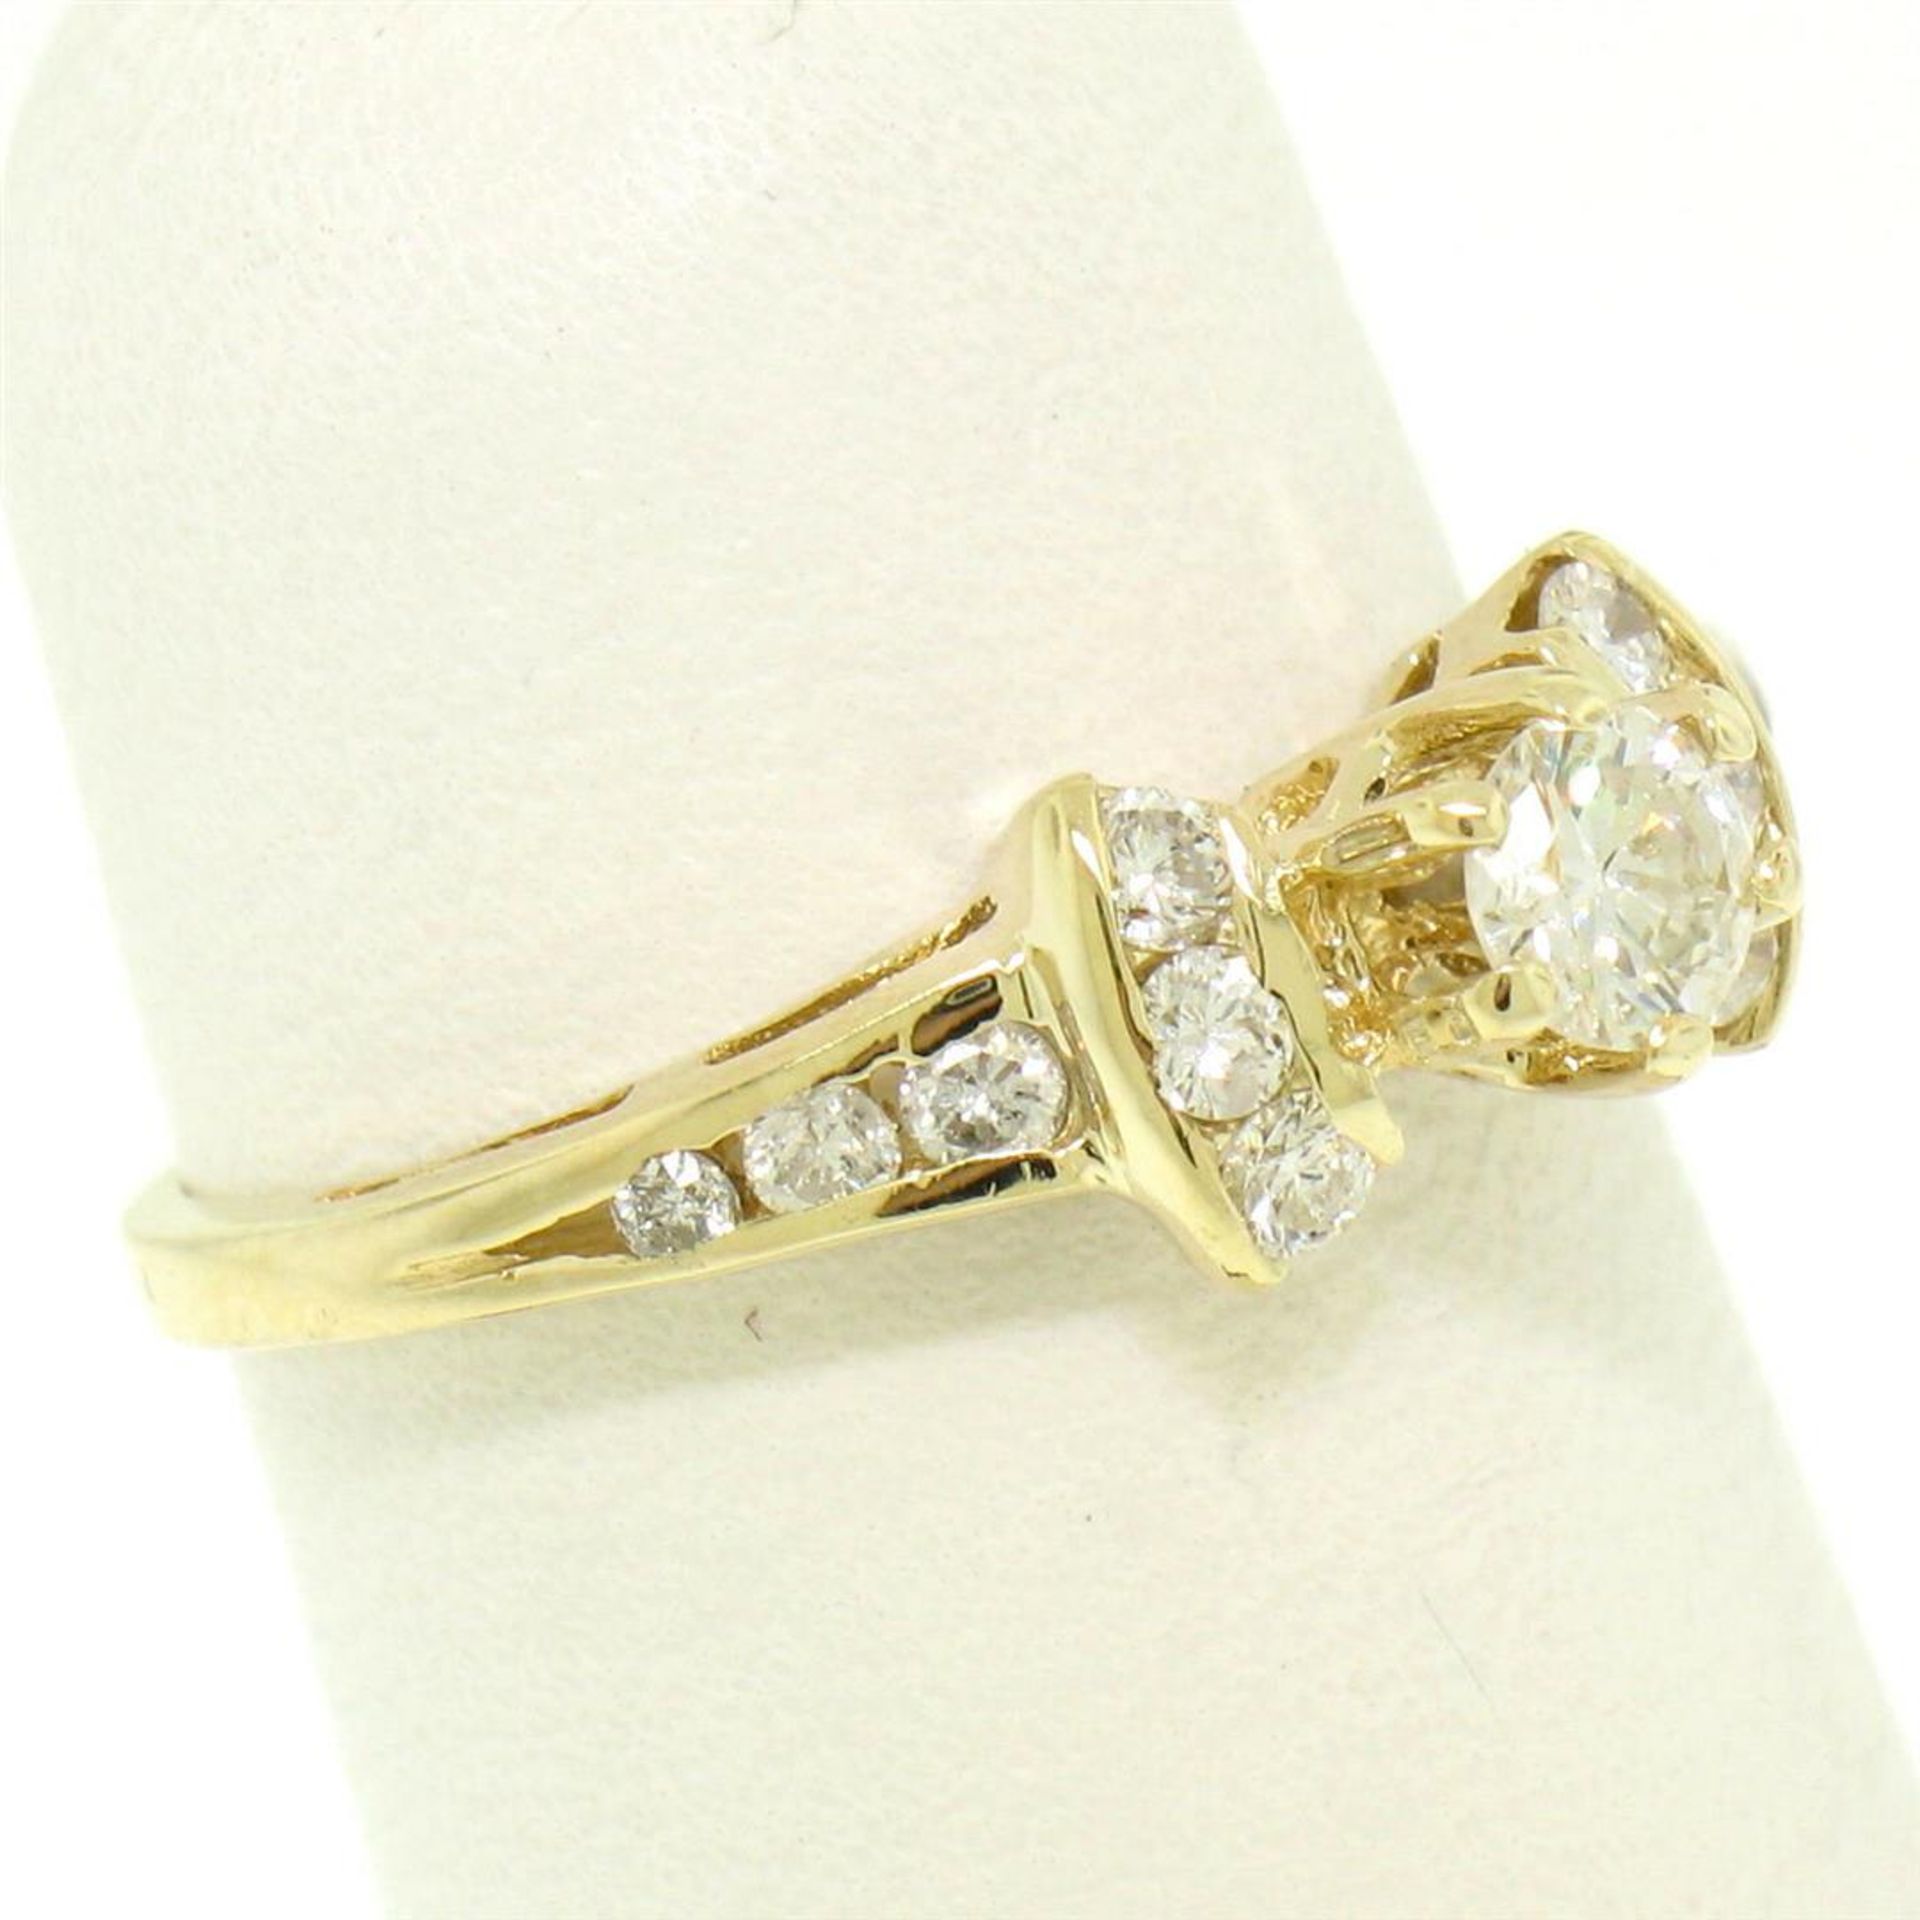 14k Yellow Gold Petite 0.42 ctw Round Diamond Engagement Ring w/ Channel Accents - Image 6 of 8